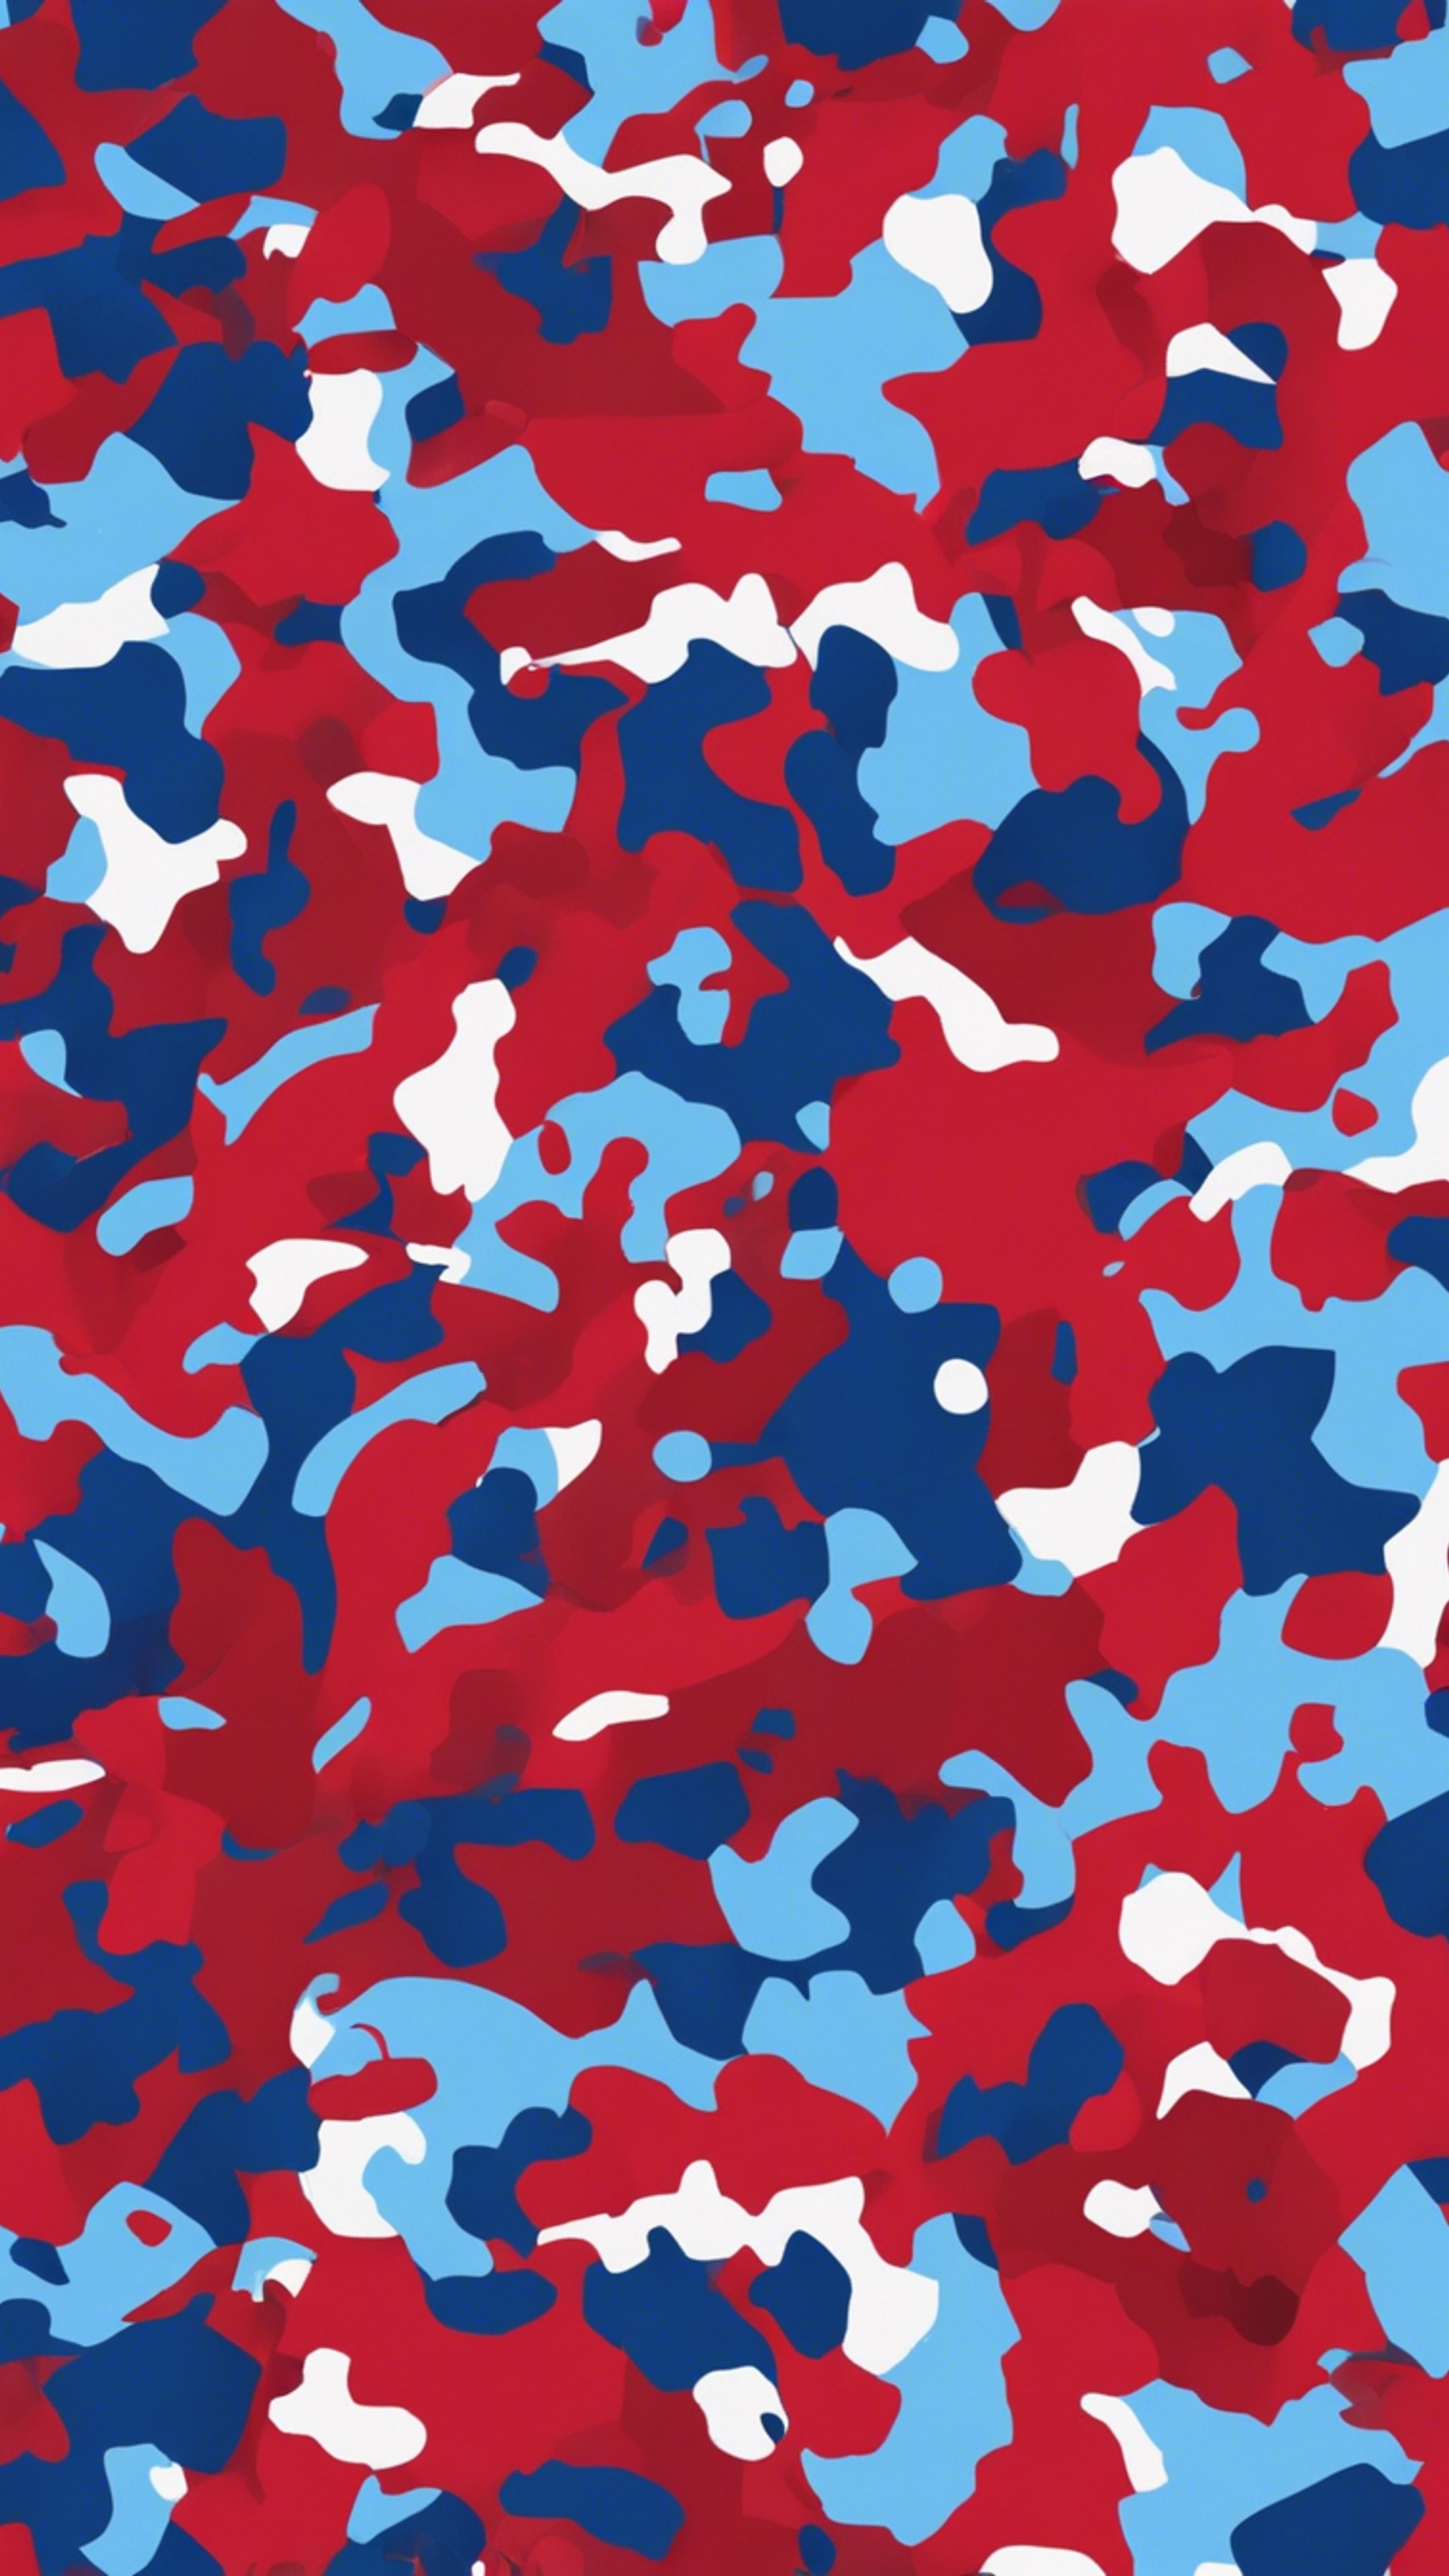 Camouflage pattern in shades of red and blue distributed randomly. Обои[29e12ceb4fee465f920c]